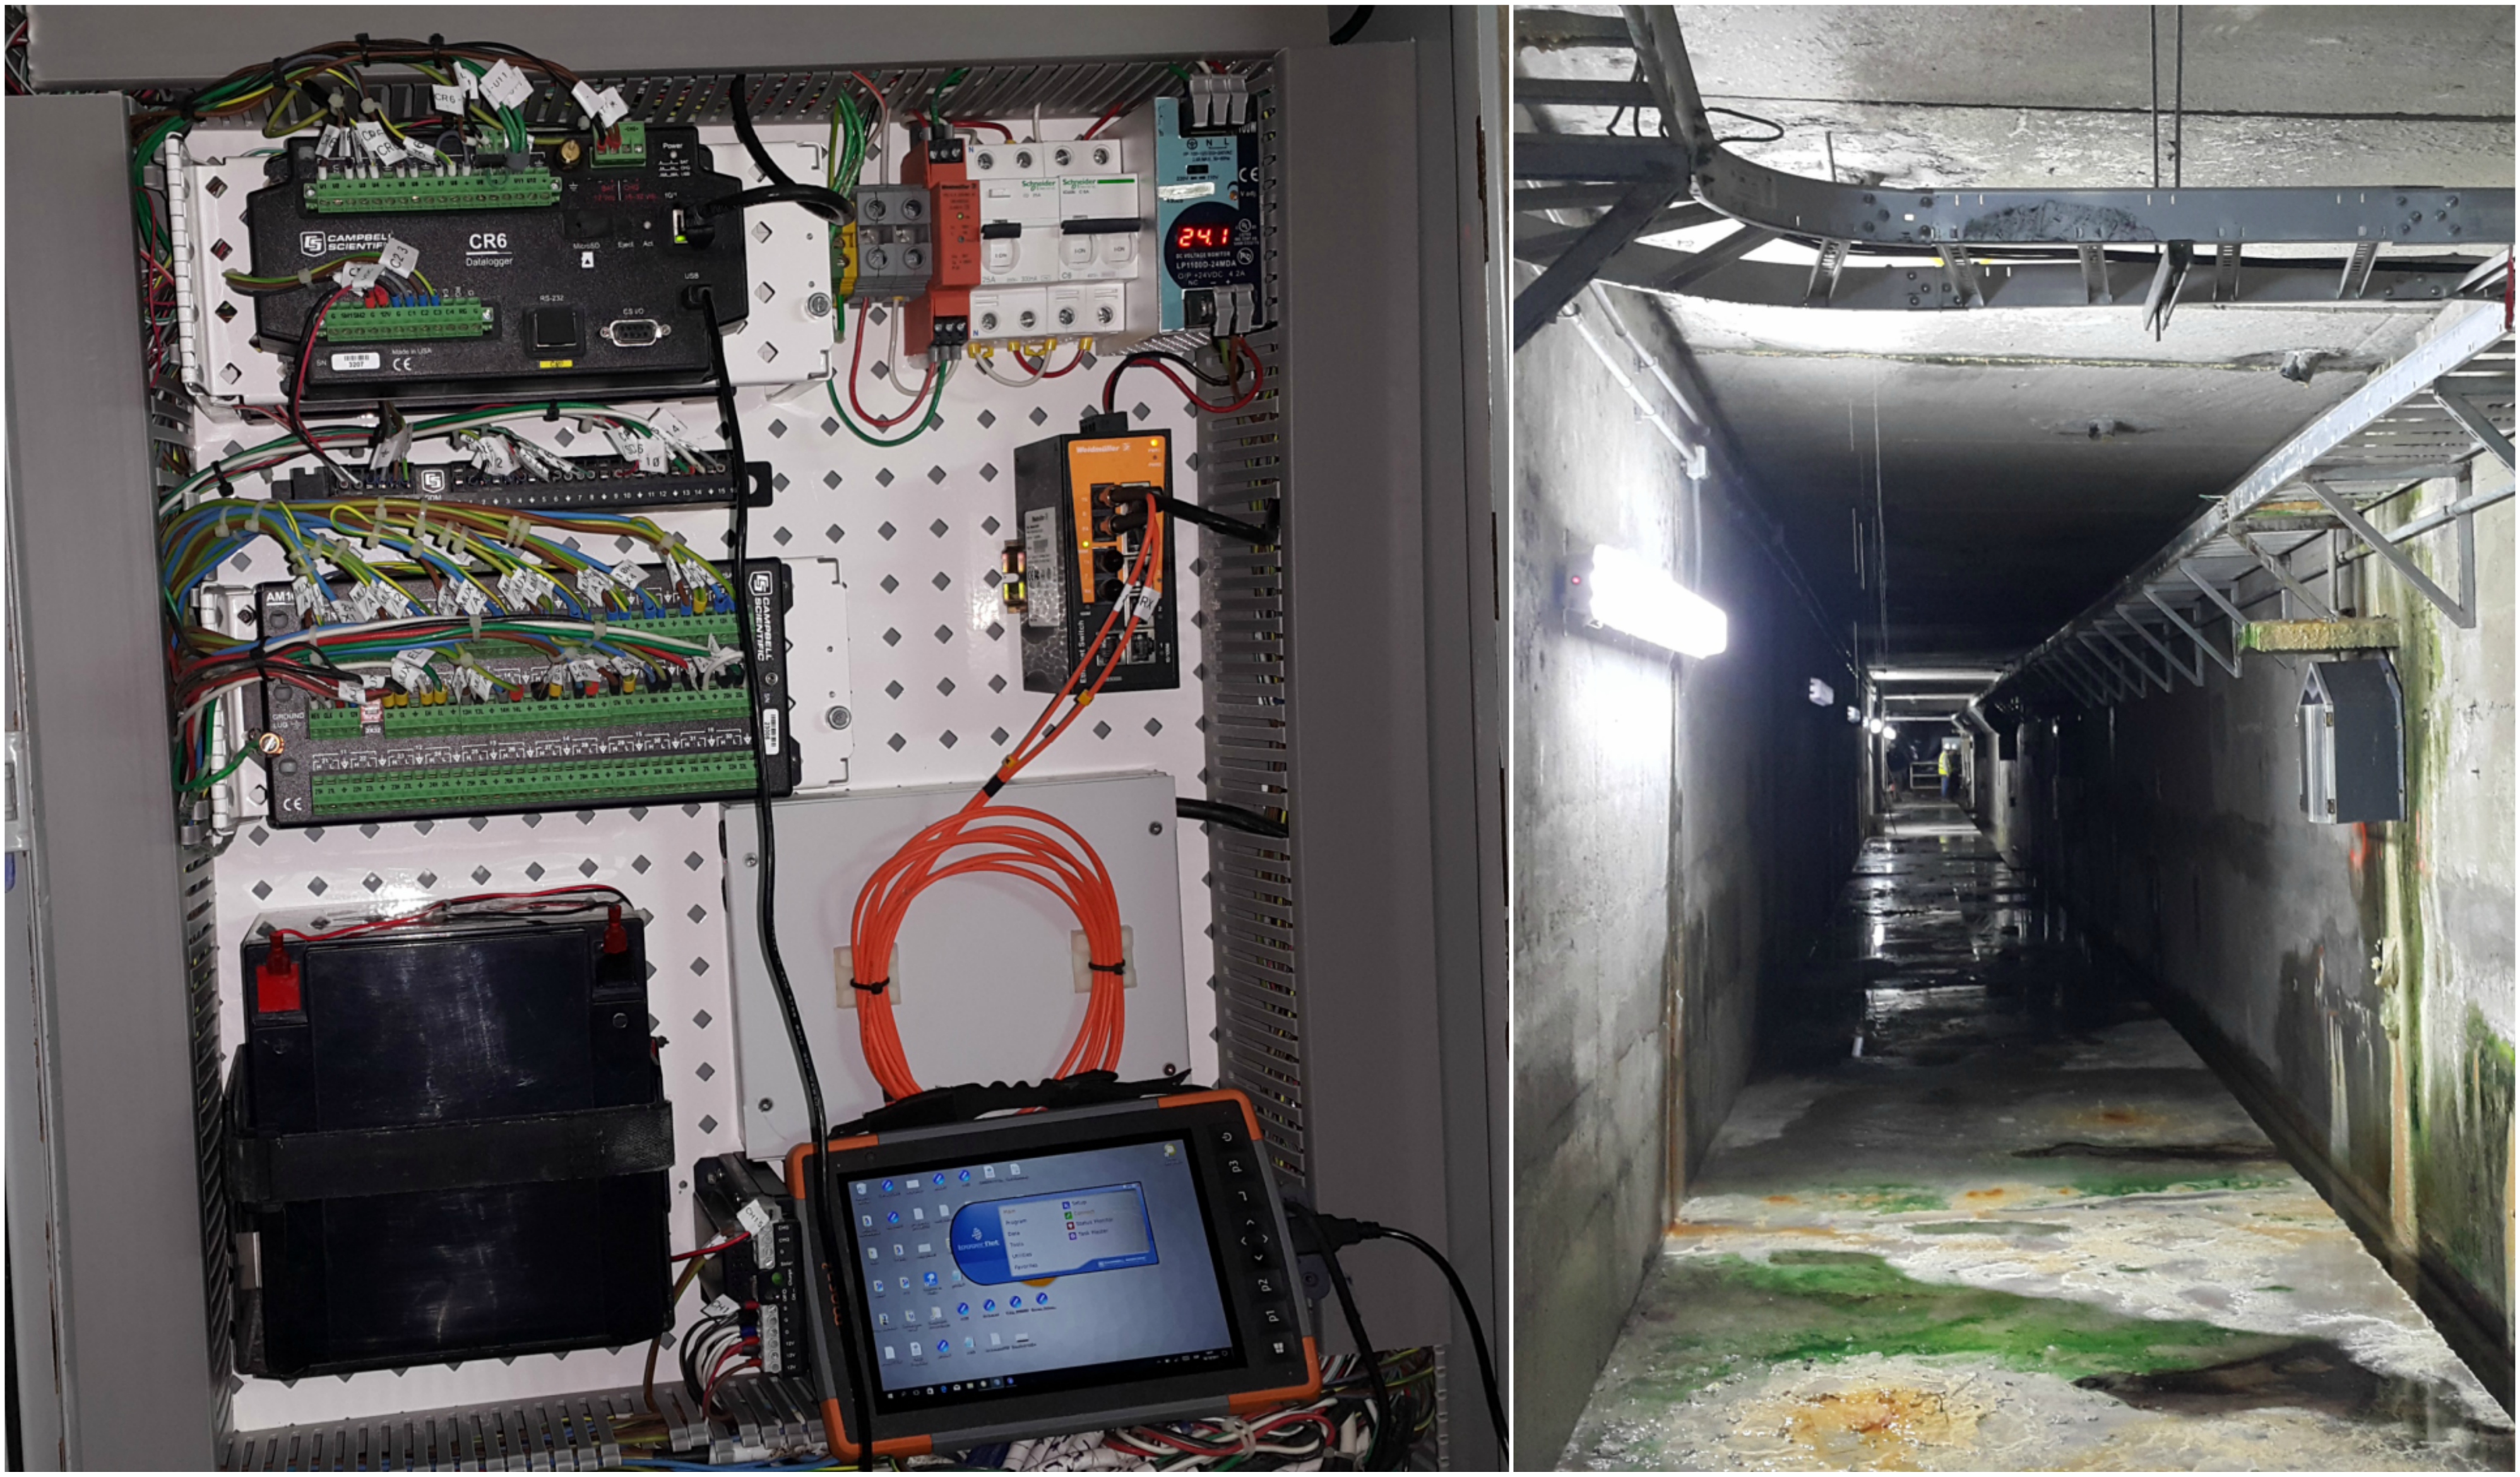 Wiring inside an enclosure on left and a hydroelectrical dam on right